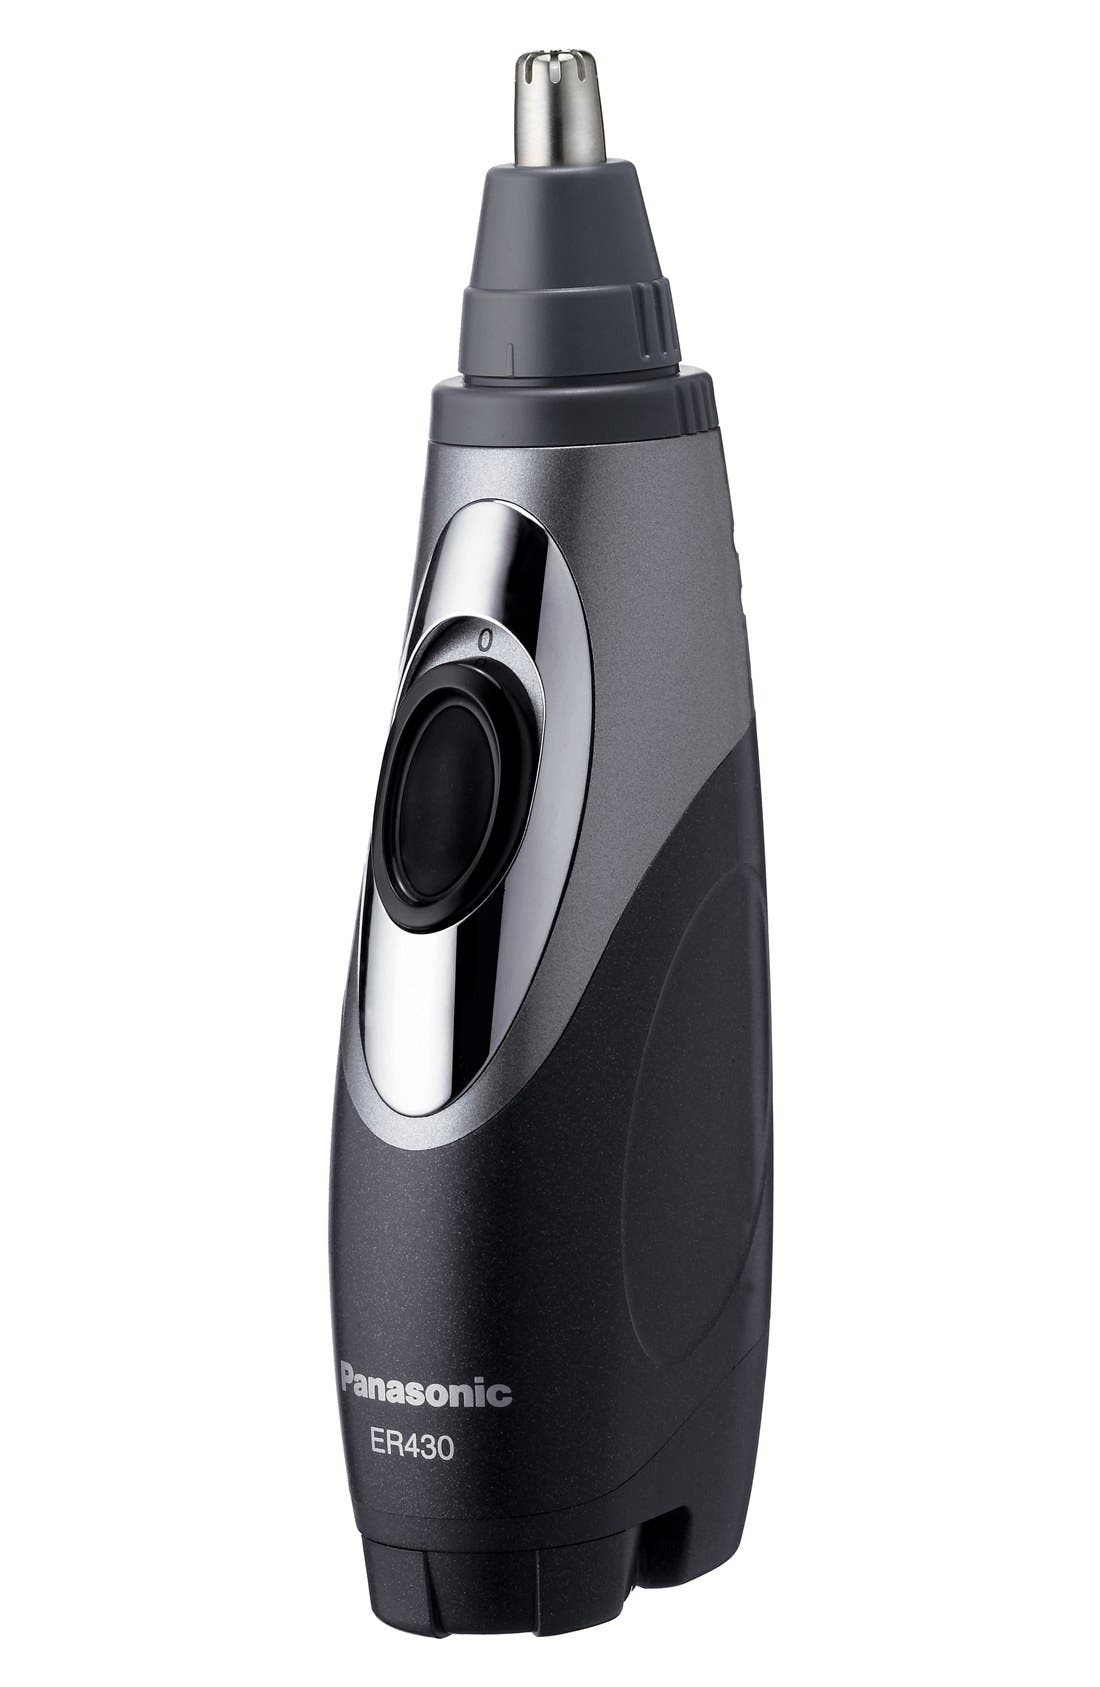 wet dry nose trimmer